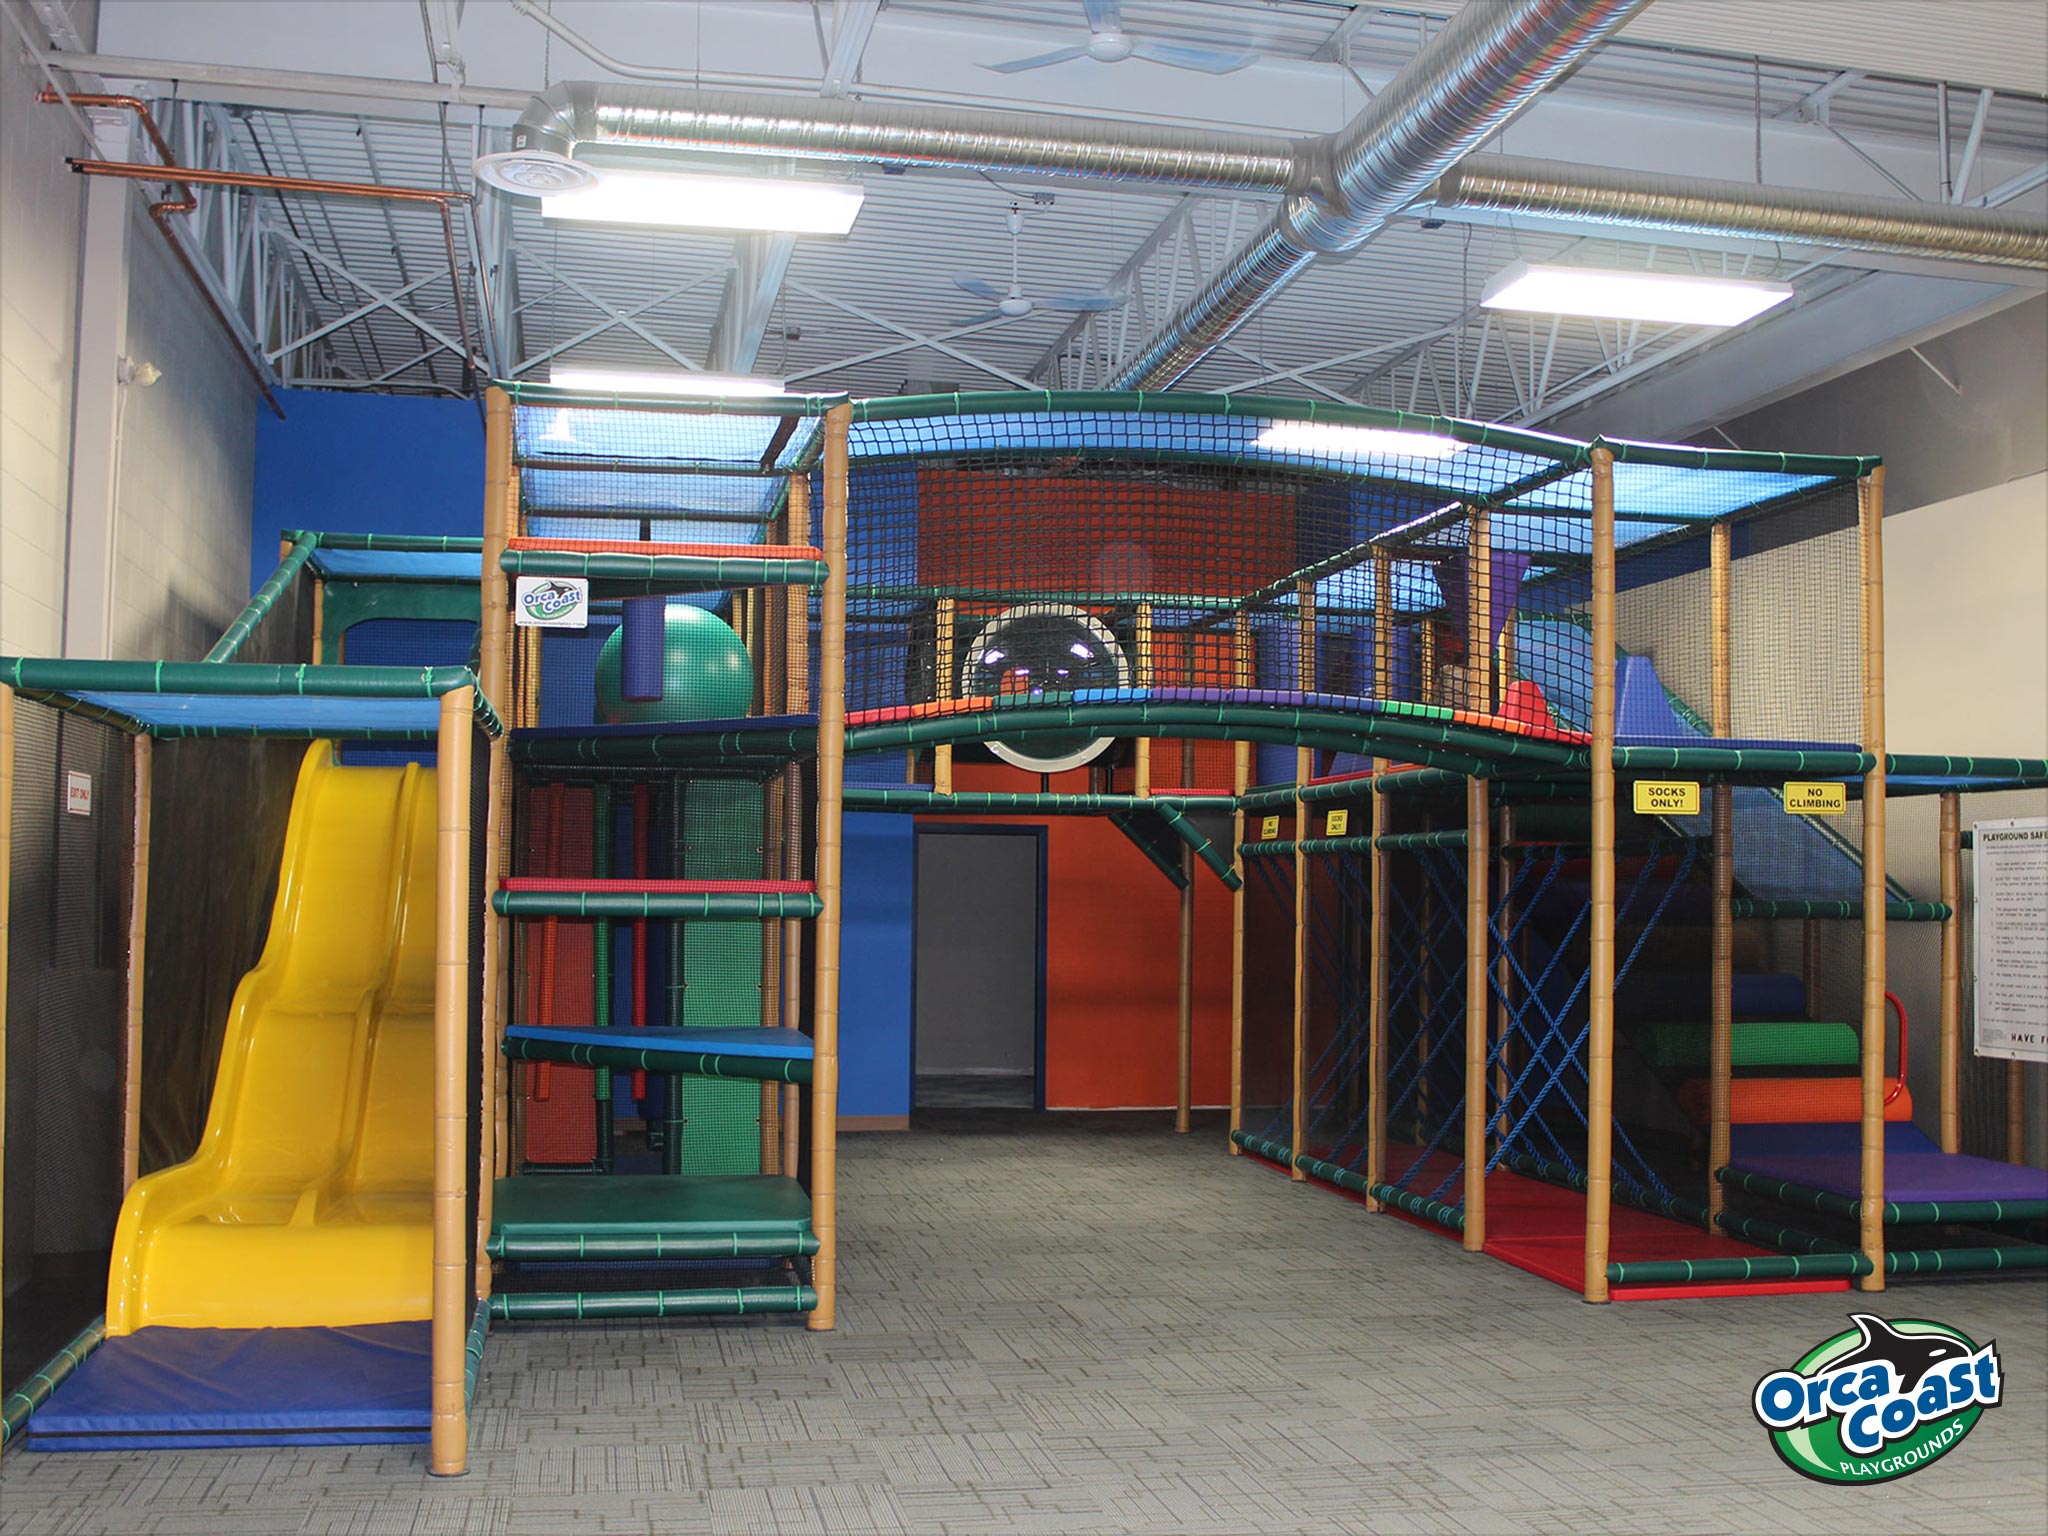 Cafe indoor playground built by orcacoastplay.com